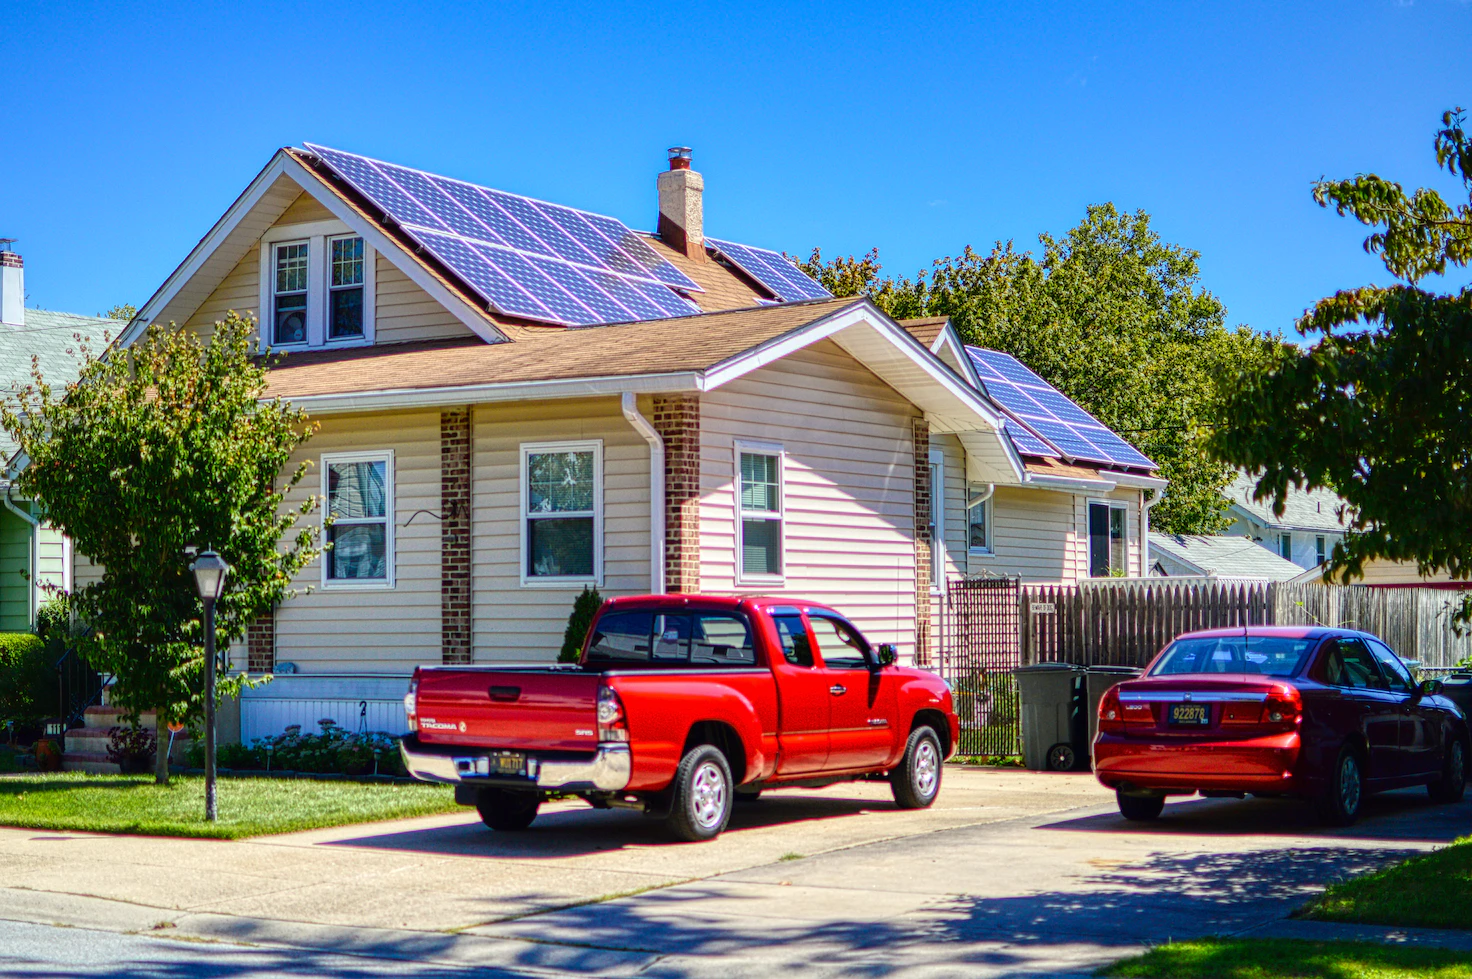 On-grid, Off-grid and Hybrid: Which is better for you?